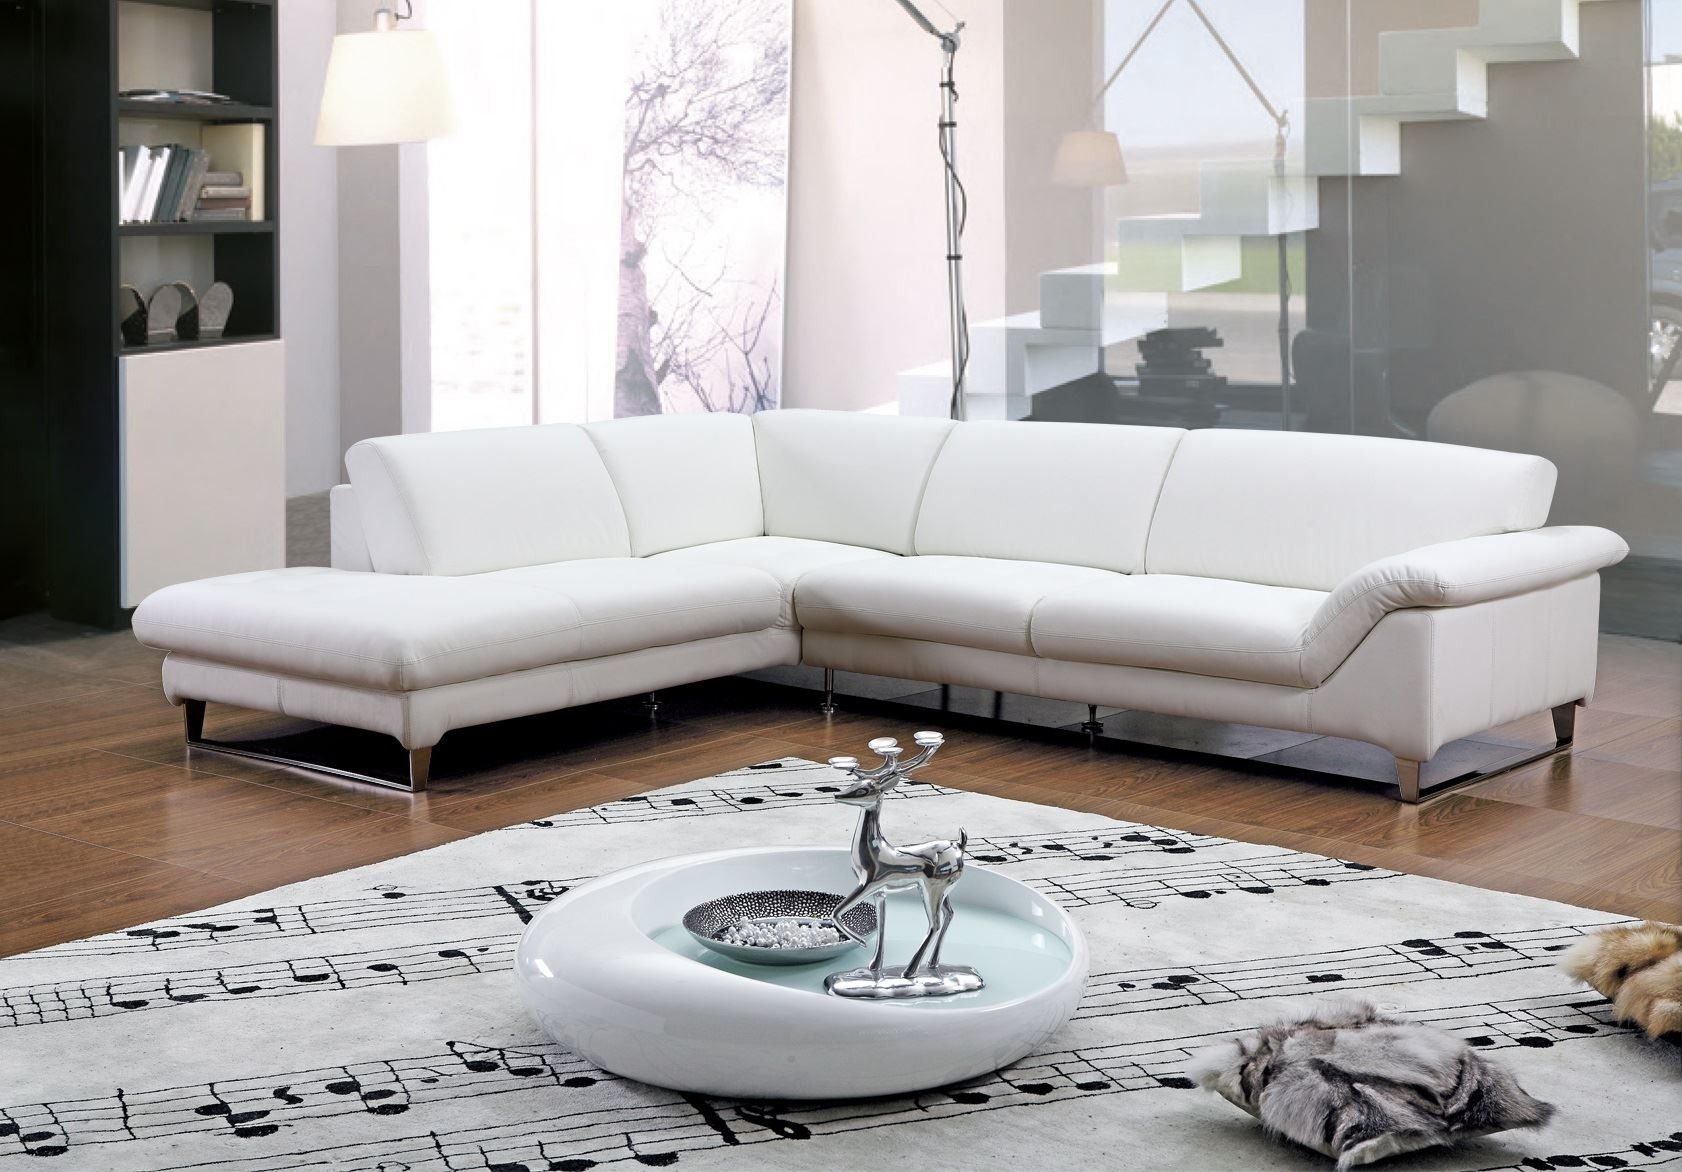 White Leather Sofa With Short Silver Steel Legs On The Brown Wooden Inside White Leather Corner Sofas (View 5 of 10)